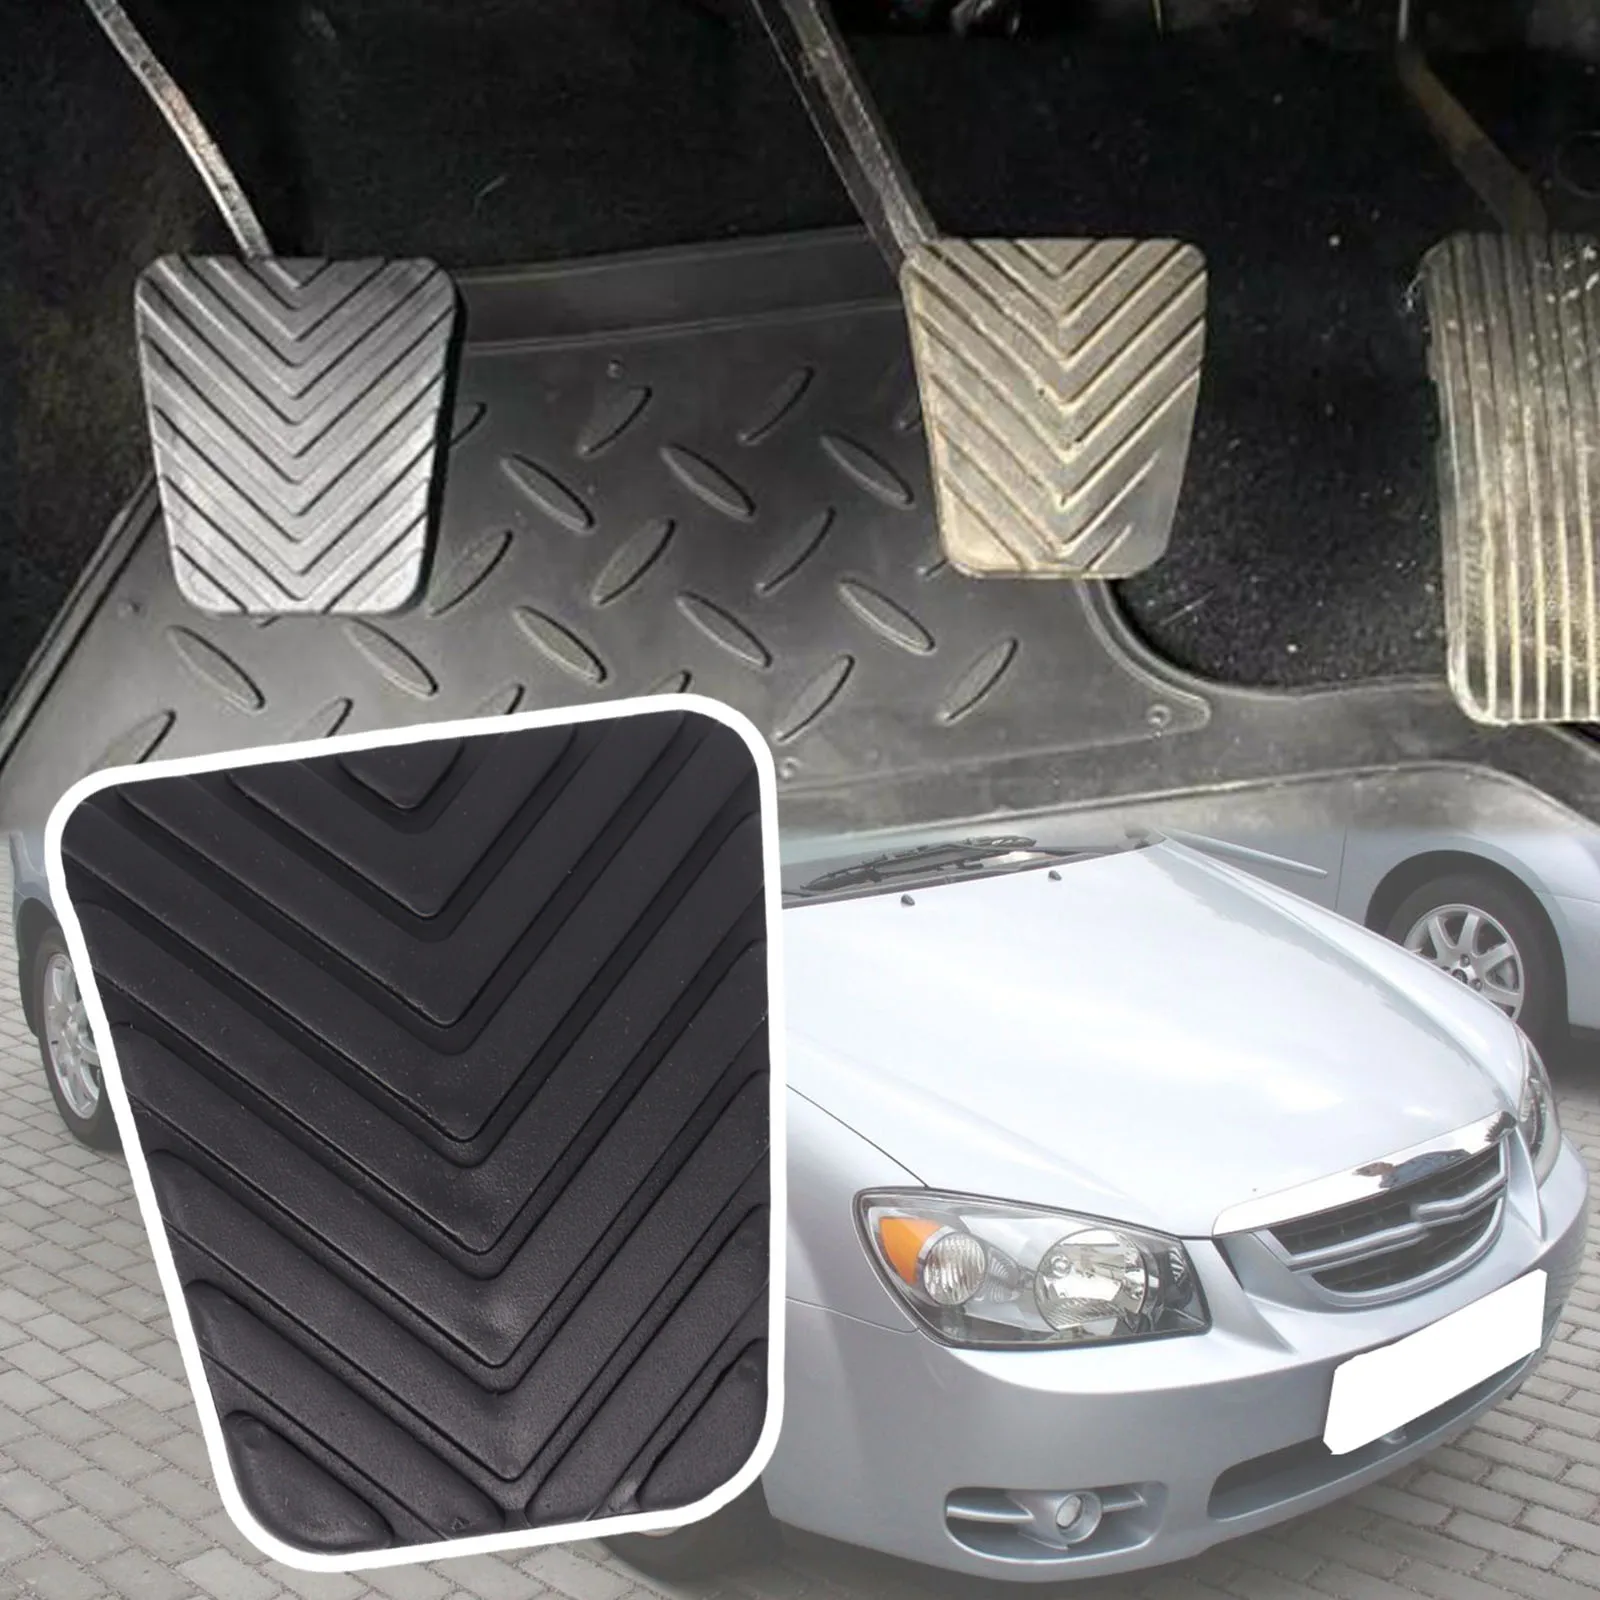 Brake Clutch Foot Pedal Pad Cover For Kia Cerato LD TD YD 2004 - 2009 20... - $7.93